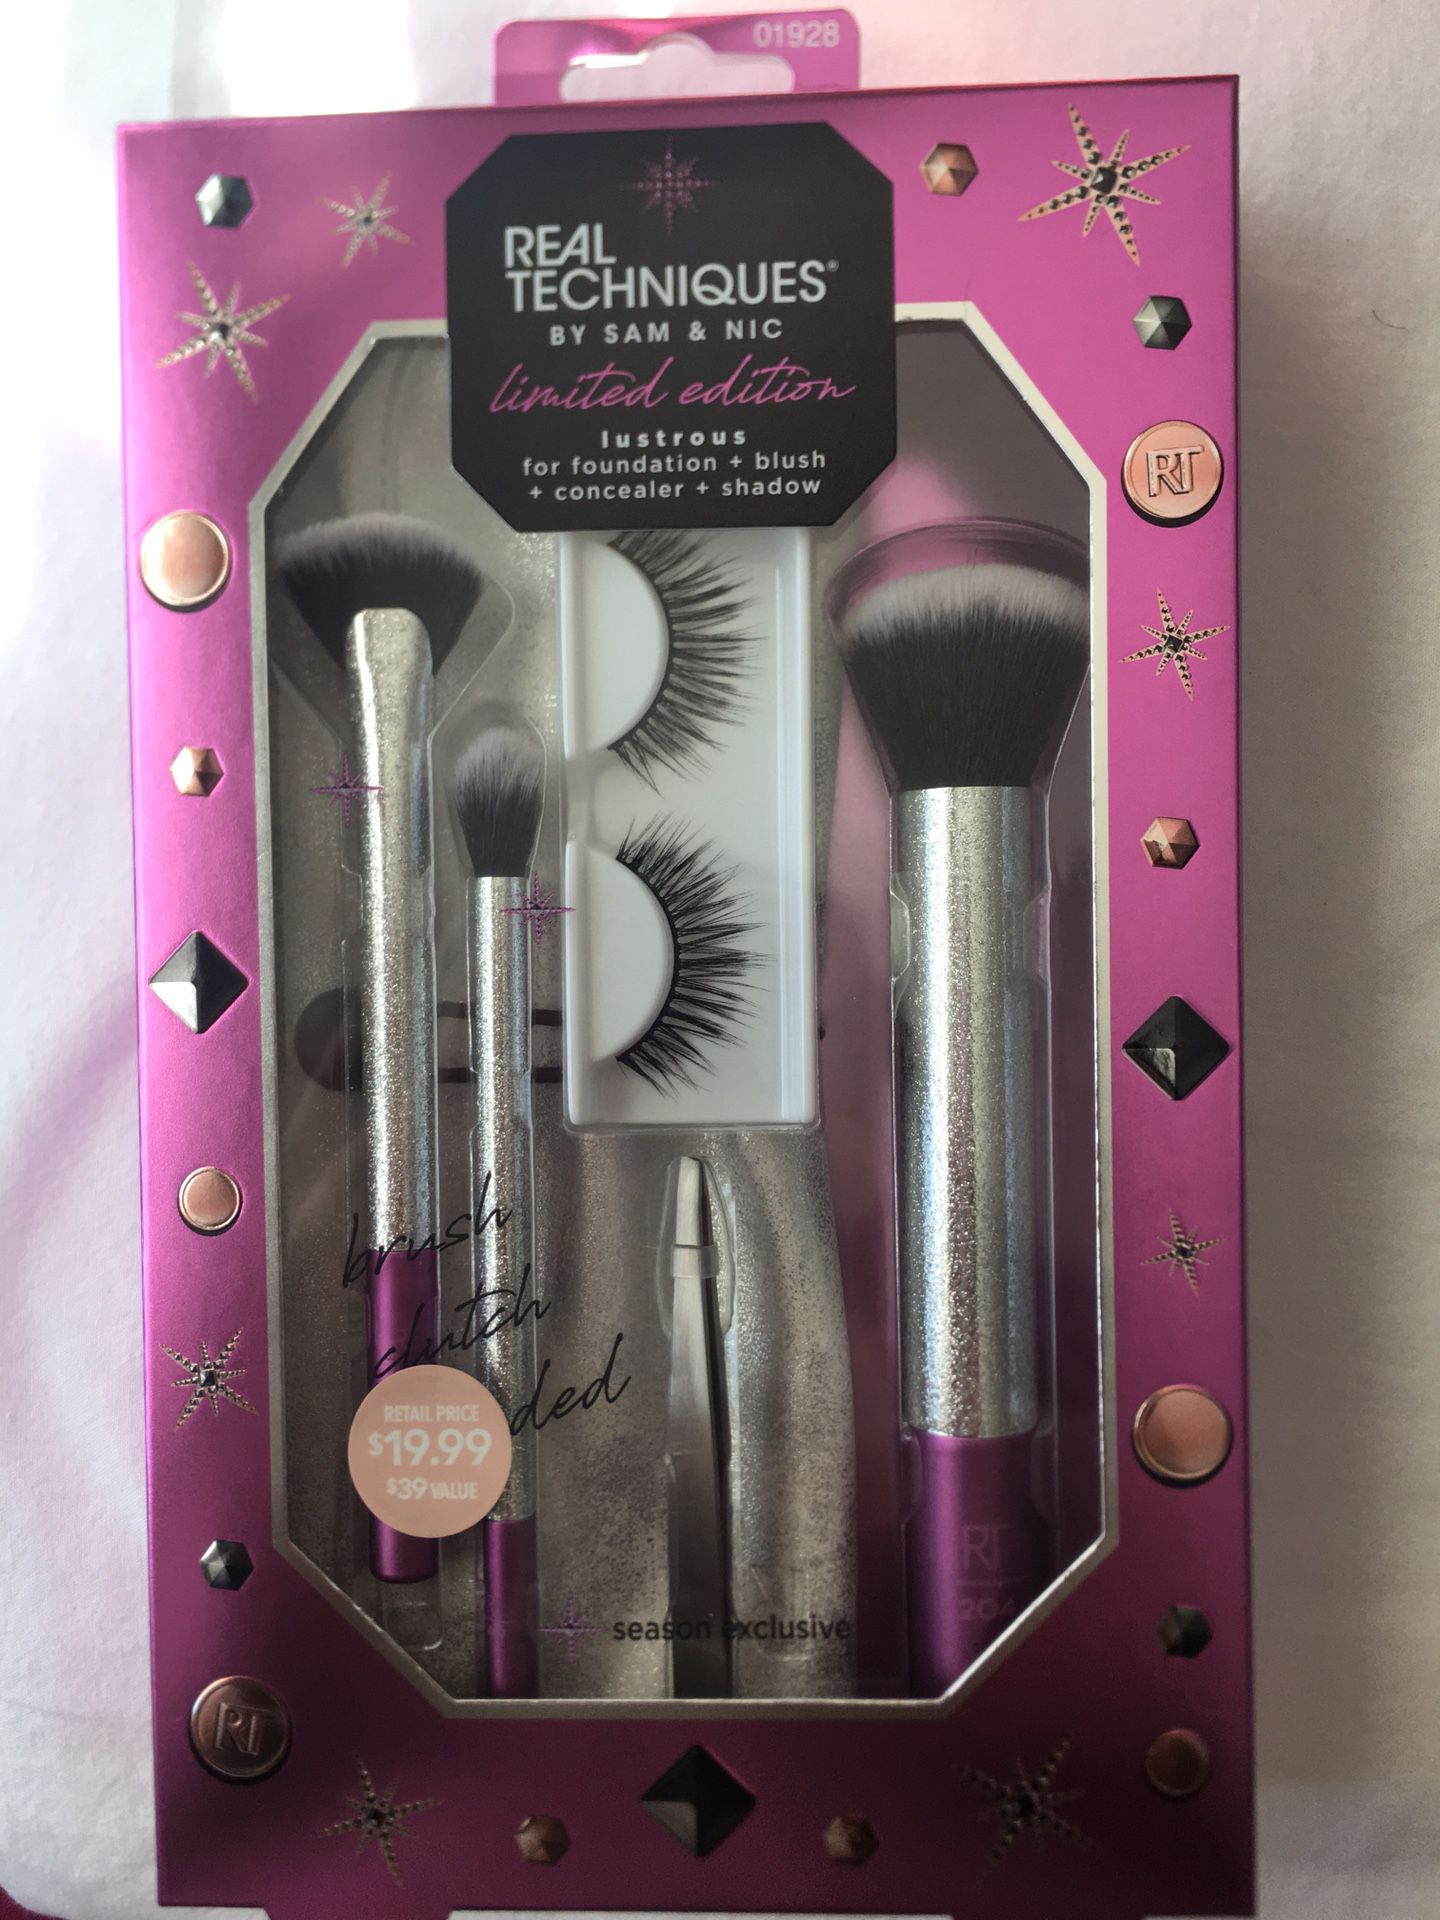 Real techniques brush sets , limited edition, 10$ each “Perfect Christmas Gift!”